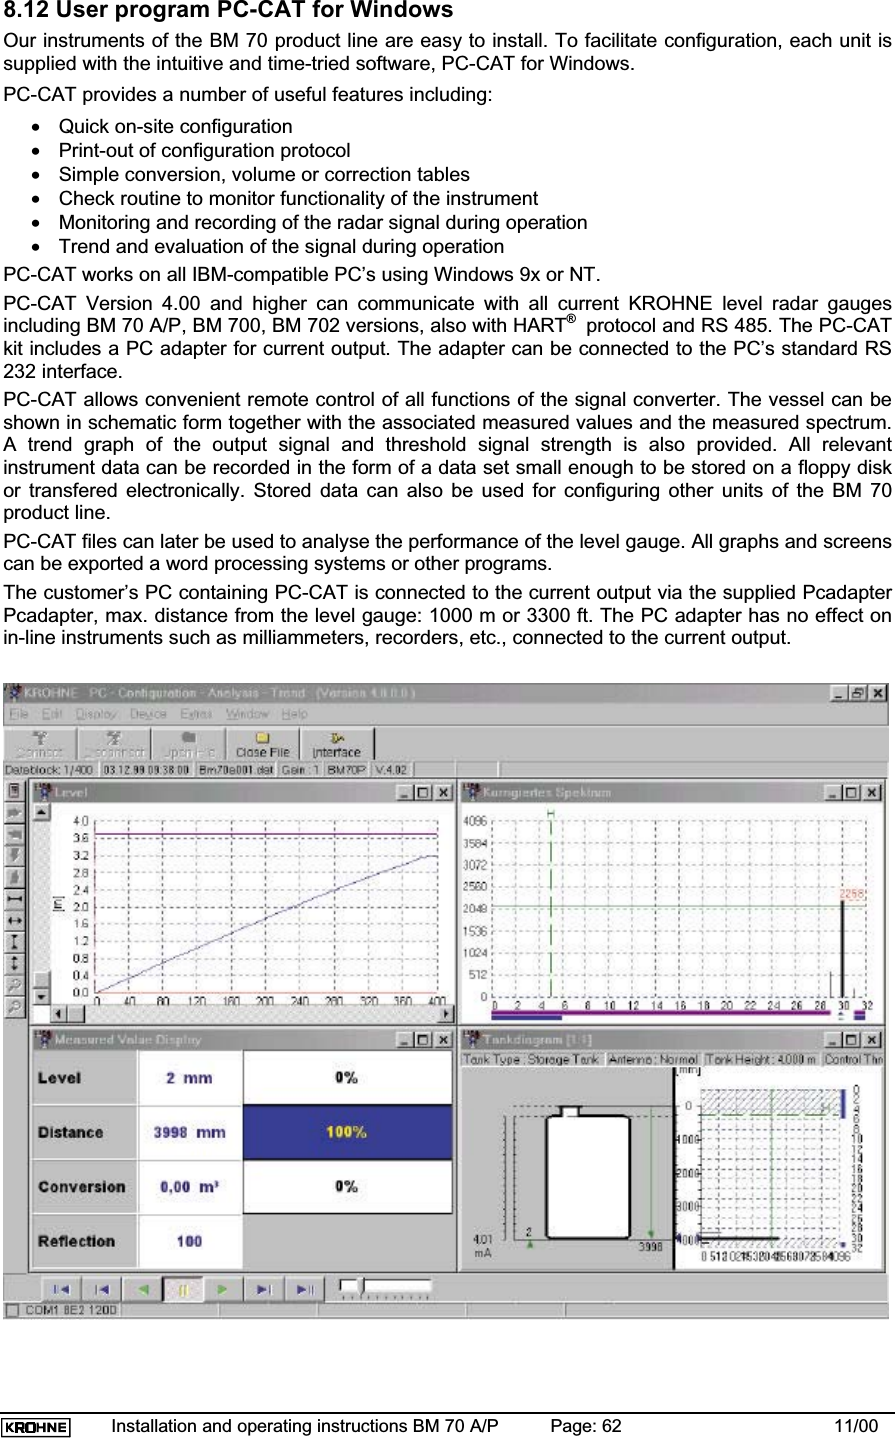 Installation and operating instructions BM 70 A/P Page: 62 11/008.12 User program PC-CAT for WindowsOur instruments of the BM 70 product line are easy to install. To facilitate configuration, each unit issupplied with the intuitive and time-tried software, PC-CAT for Windows.PC-CAT provides a number of useful features including:•Quick on-site configuration•Print-out of configuration protocol•Simple conversion, volume or correction tables•Check routine to monitor functionality of the instrument•Monitoring and recording of the radar signal during operation•Trend and evaluation of the signal during operationPC-CAT works on all IBM-compatible PC’s using Windows 9x or NT.PC-CAT Version 4.00 and higher can communicate with all current KROHNE level radar gaugesincluding BM 70 A/P, BM 700, BM 702 versions, also with HART® protocol and RS 485. The PC-CATkit includes a PC adapter for current output. The adapter can be connected to the PC’s standard RS232 interface.PC-CAT allows convenient remote control of all functions of the signal converter. The vessel can beshown in schematic form together with the associated measured values and the measured spectrum.A trend graph of the output signal and threshold signal strength is also provided. All relevantinstrument data can be recorded in the form of a data set small enough to be stored on a floppy diskor transfered electronically. Stored data can also be used for configuring other units of the BM 70product line.PC-CAT files can later be used to analyse the performance of the level gauge. All graphs and screenscan be exported a word processing systems or other programs.The customer’s PC containing PC-CAT is connected to the current output via the supplied PcadapterPcadapter, max. distance from the level gauge: 1000 m or 3300 ft. The PC adapter has no effect onin-line instruments such as milliammeters, recorders, etc., connected to the current output.